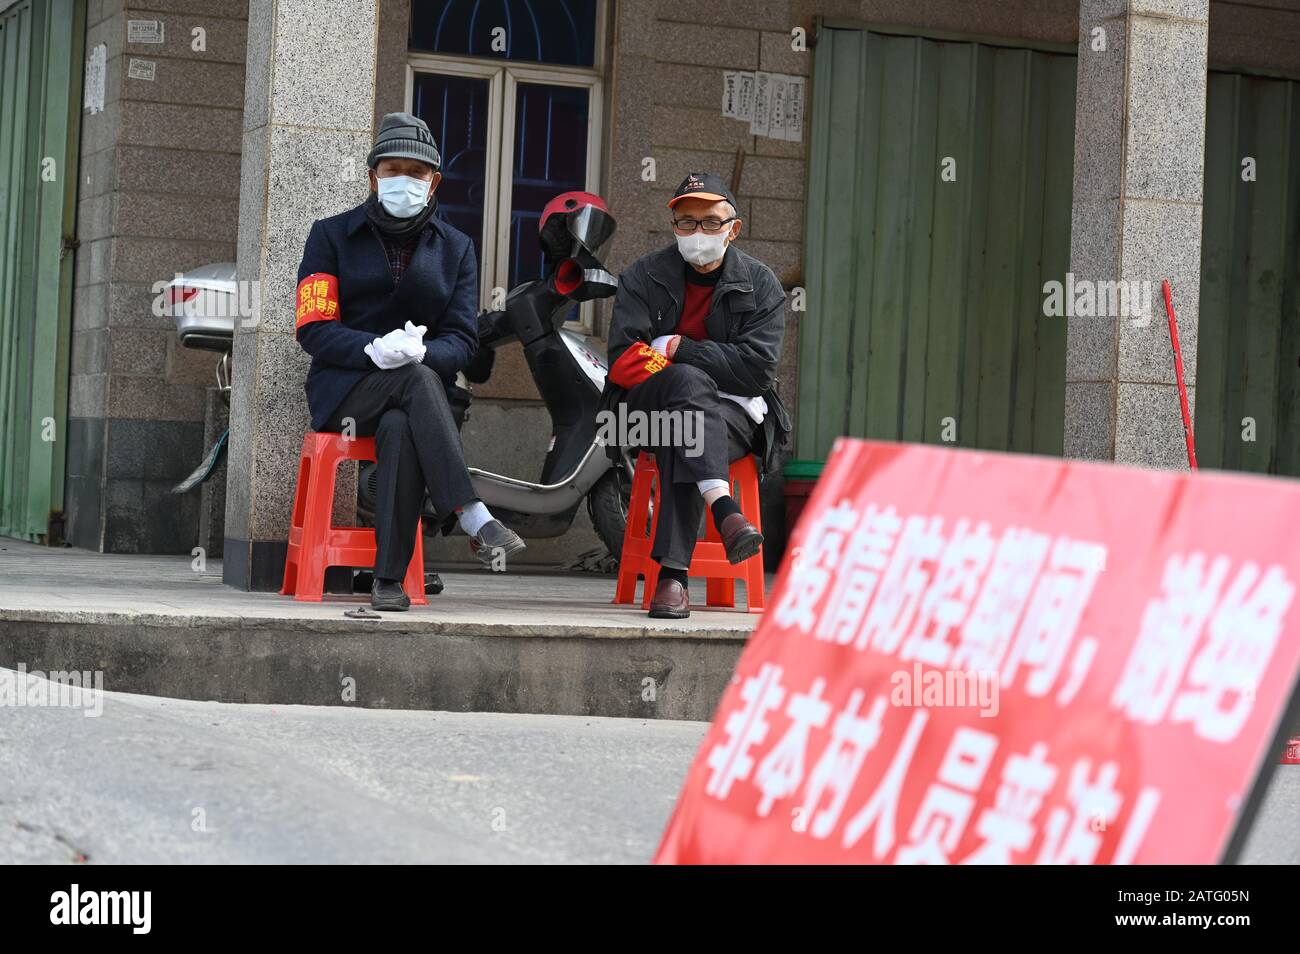 A person wearing a face mask is on duty in Quanzhou, Fujian, China. on 2th Feb 2020. According to recent data, the number of people infected with the new strain of coronavirus has risen over 14,000, with the death toll reaching 305. Credit: CPRESS PHOTO LIMITED/Alamy Live News Stock Photo